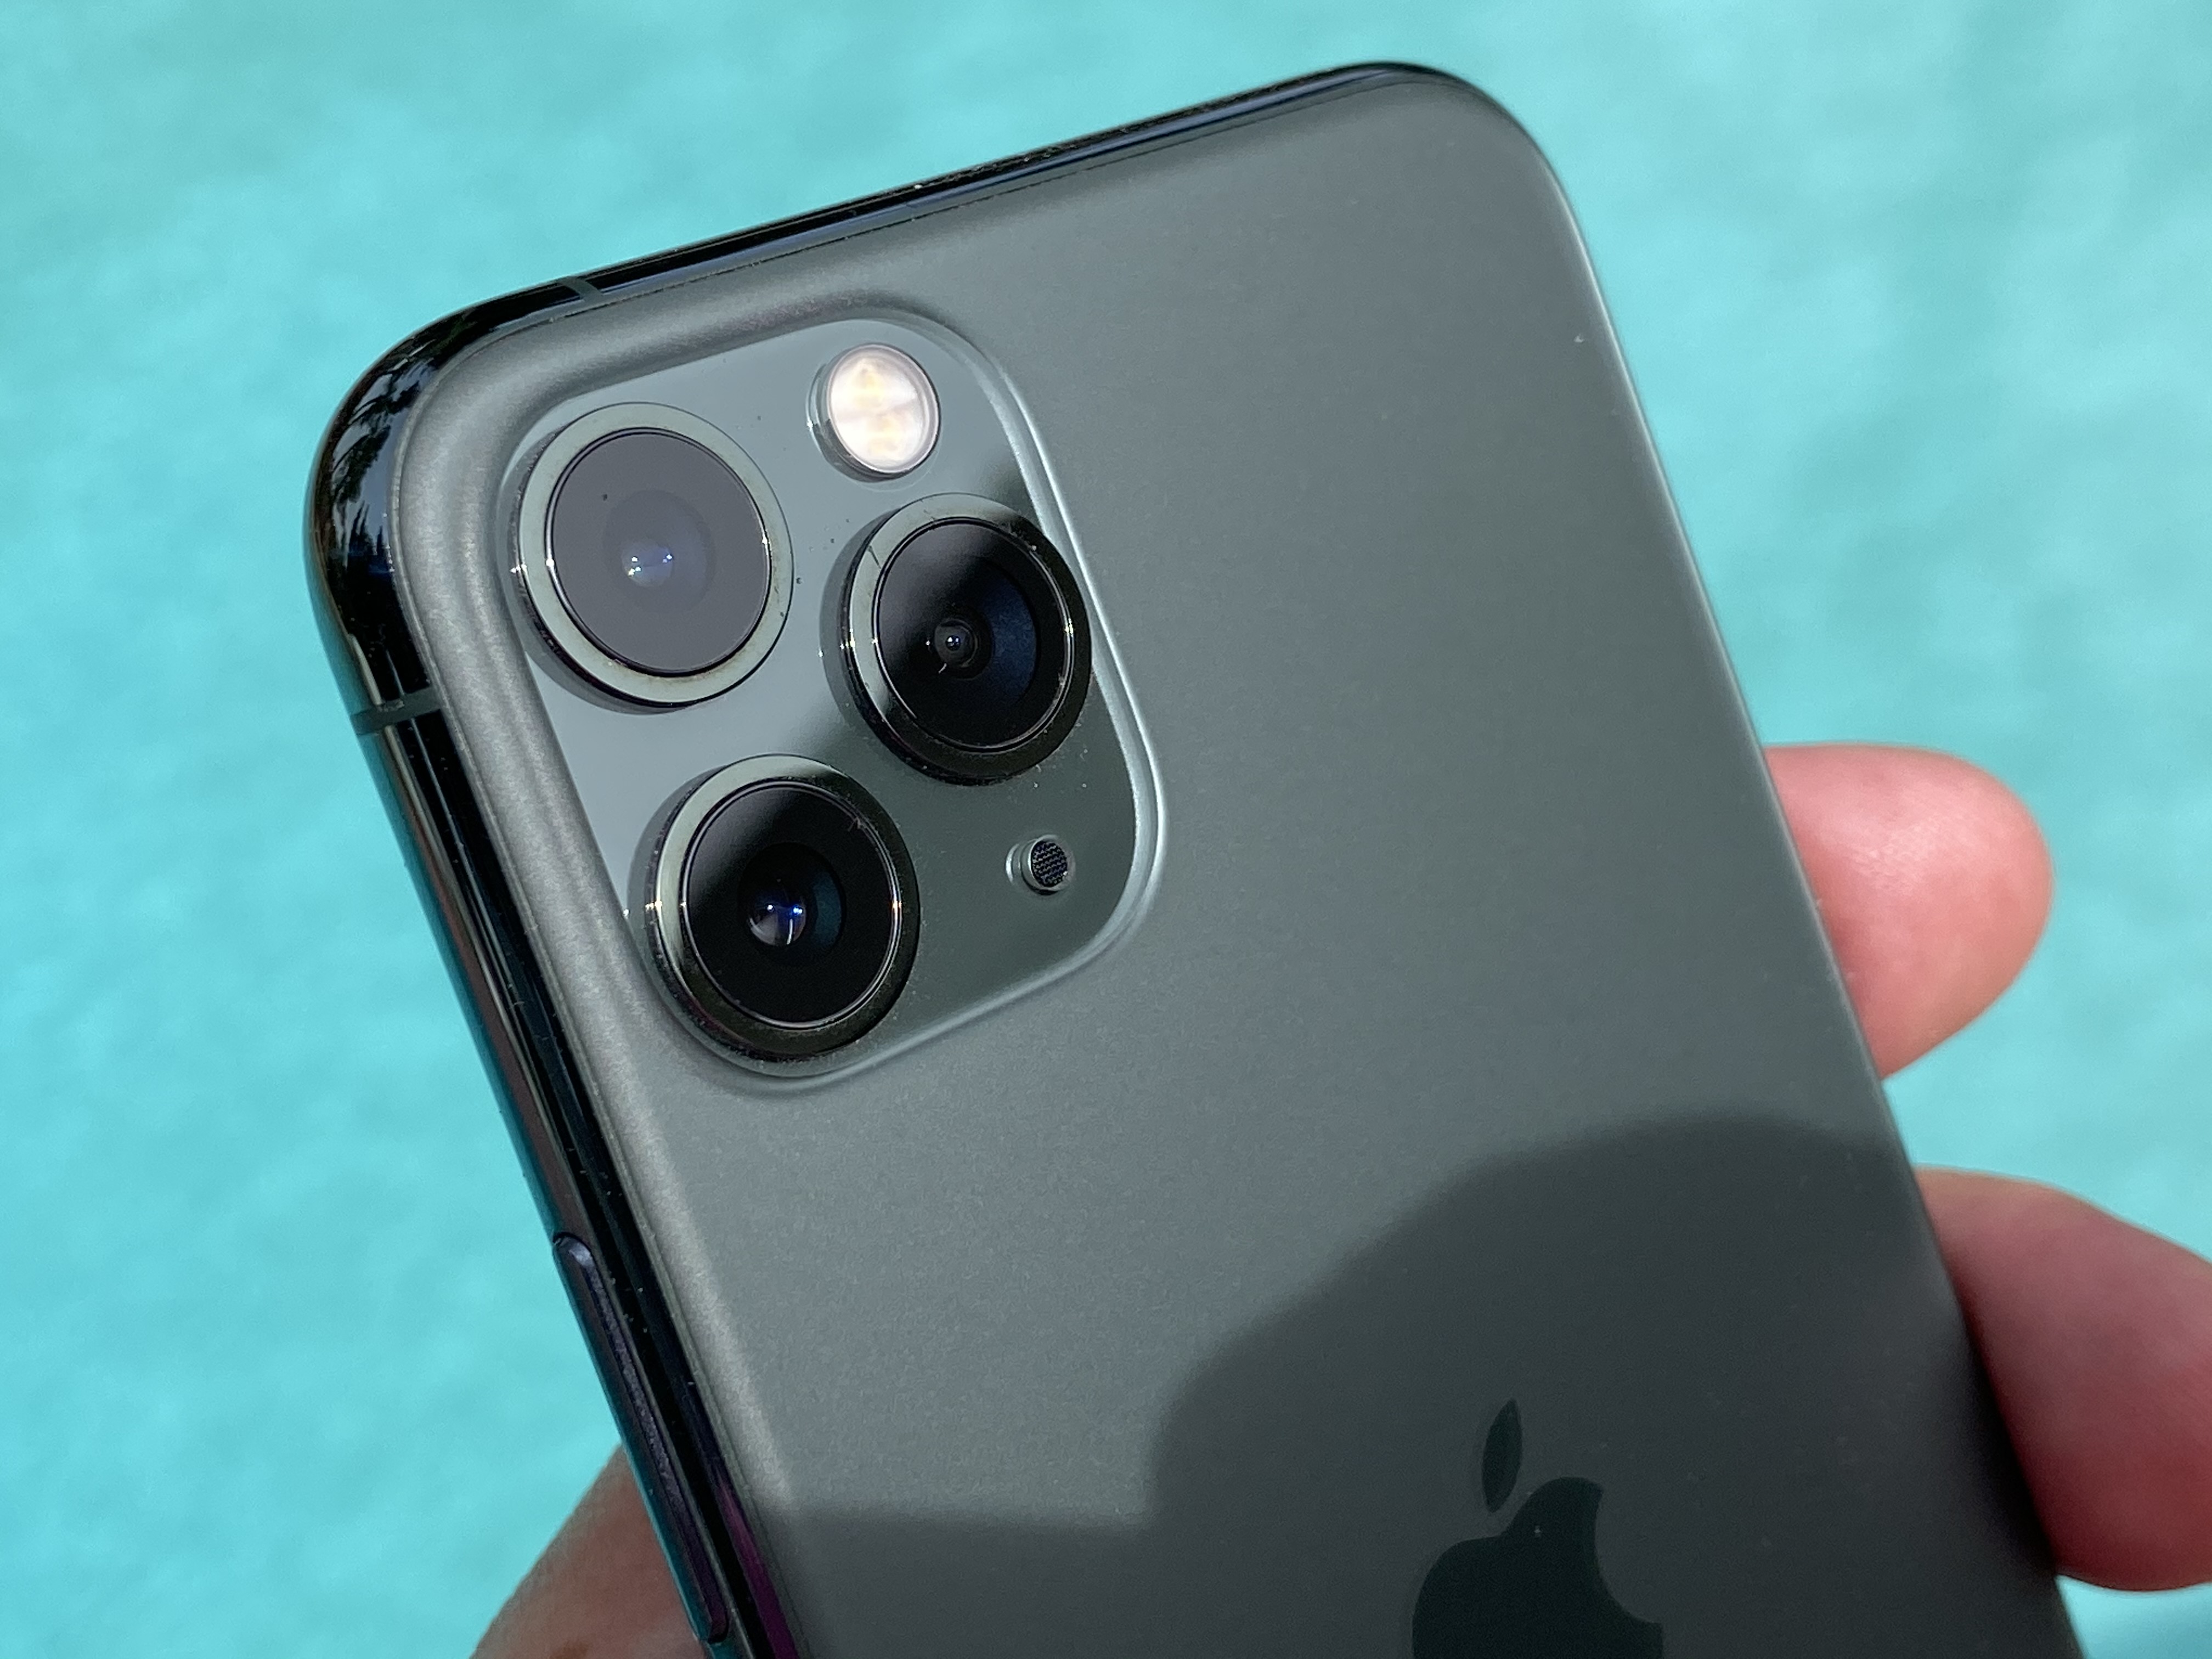 Review The Iphone 11 Pro And Iphone 11 Do Disneyland After Dark